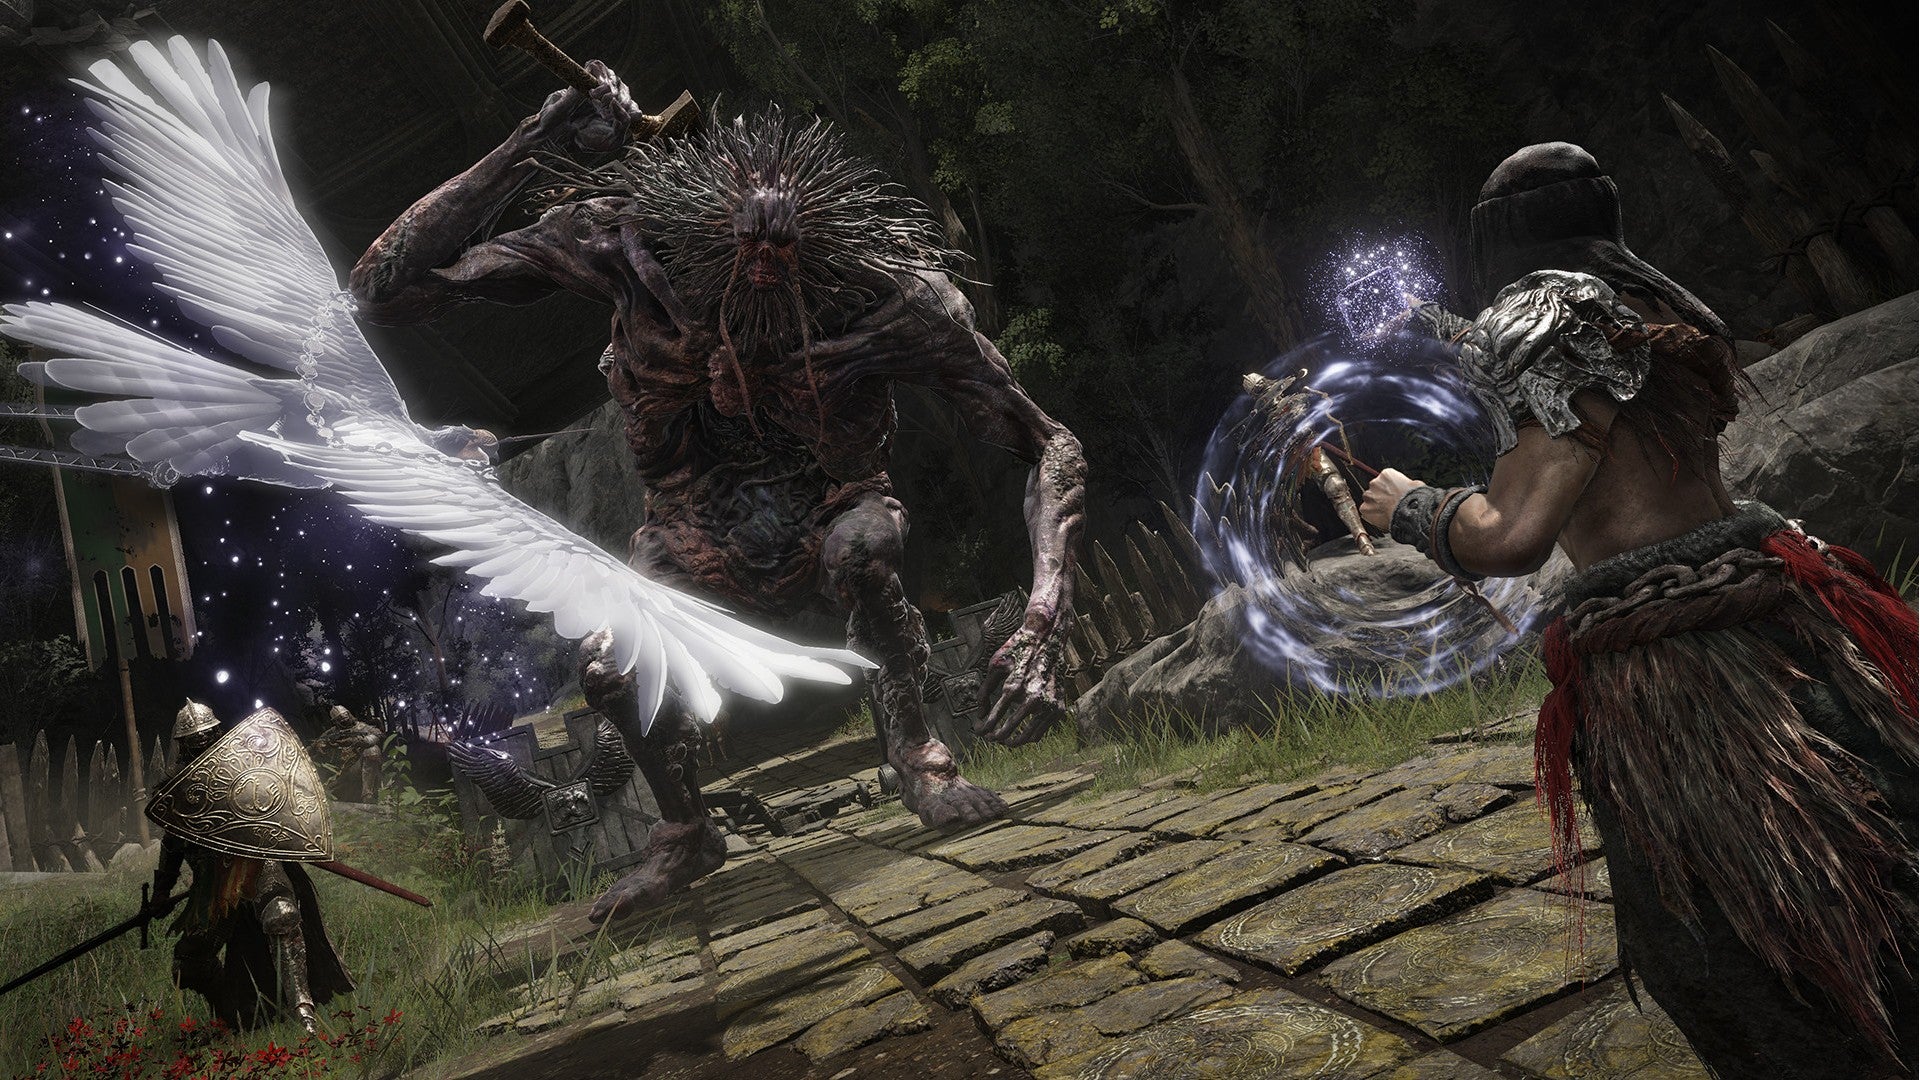 Elden Ring sorcerer fighting against a troll and some soldiers at Stormgate